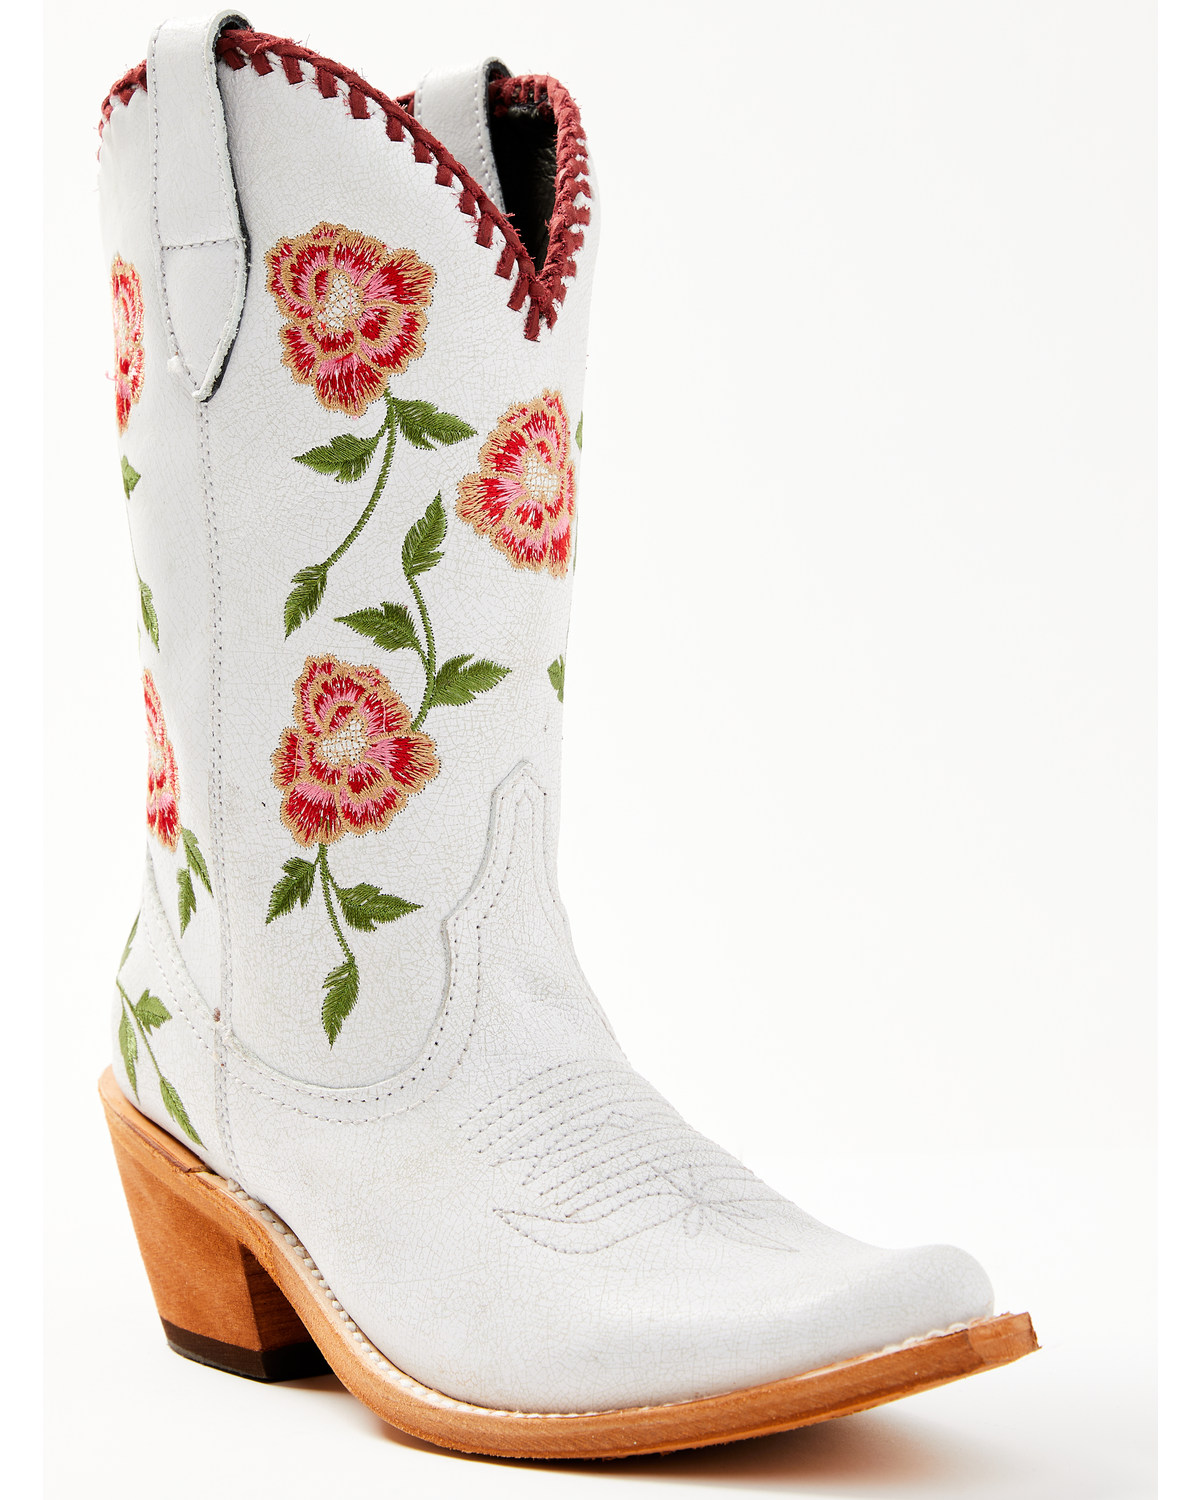 Liberty Black Women's Vicky Floral Embroidered Western Boot - Snip Toe